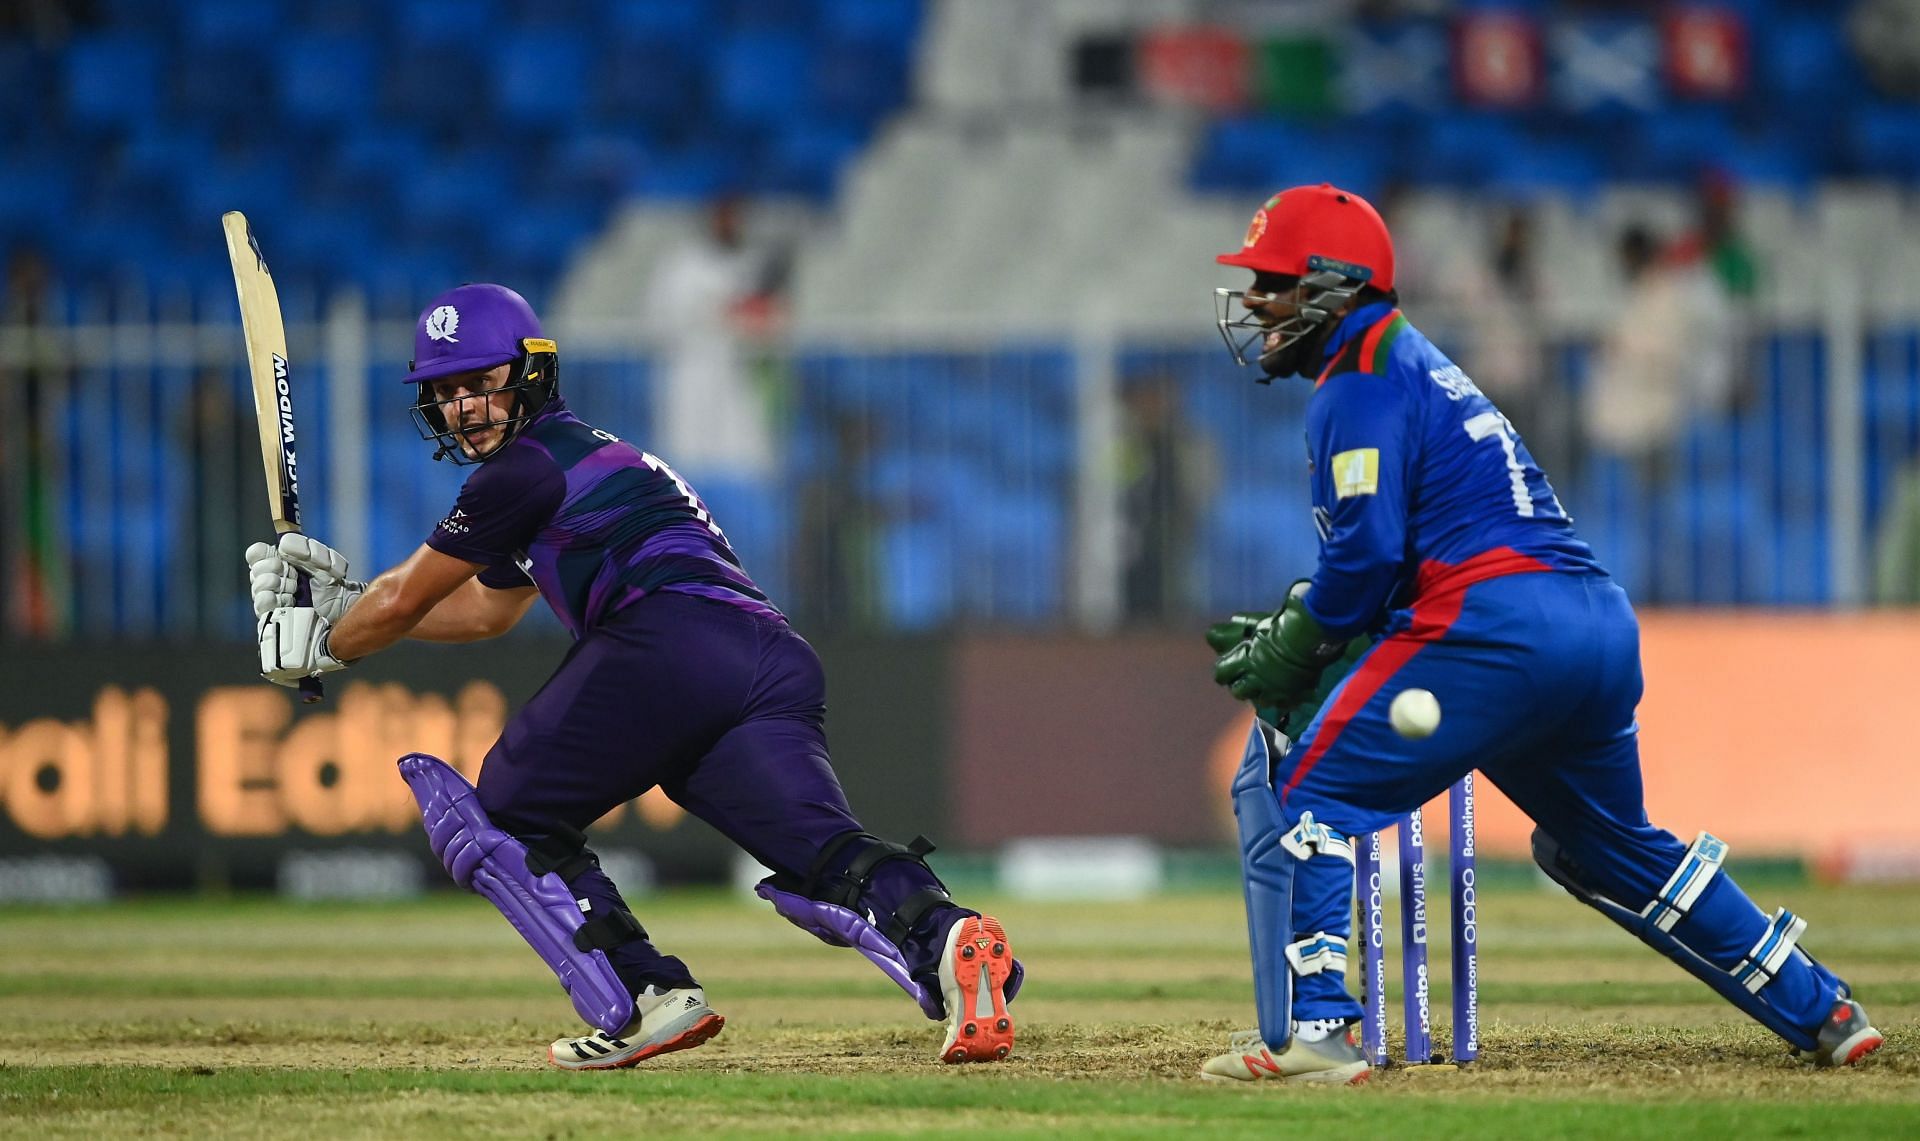 Can Scotland bounce back in ICC T20 World Cup 2021 after the embarrassing defeat against Afghanistan?